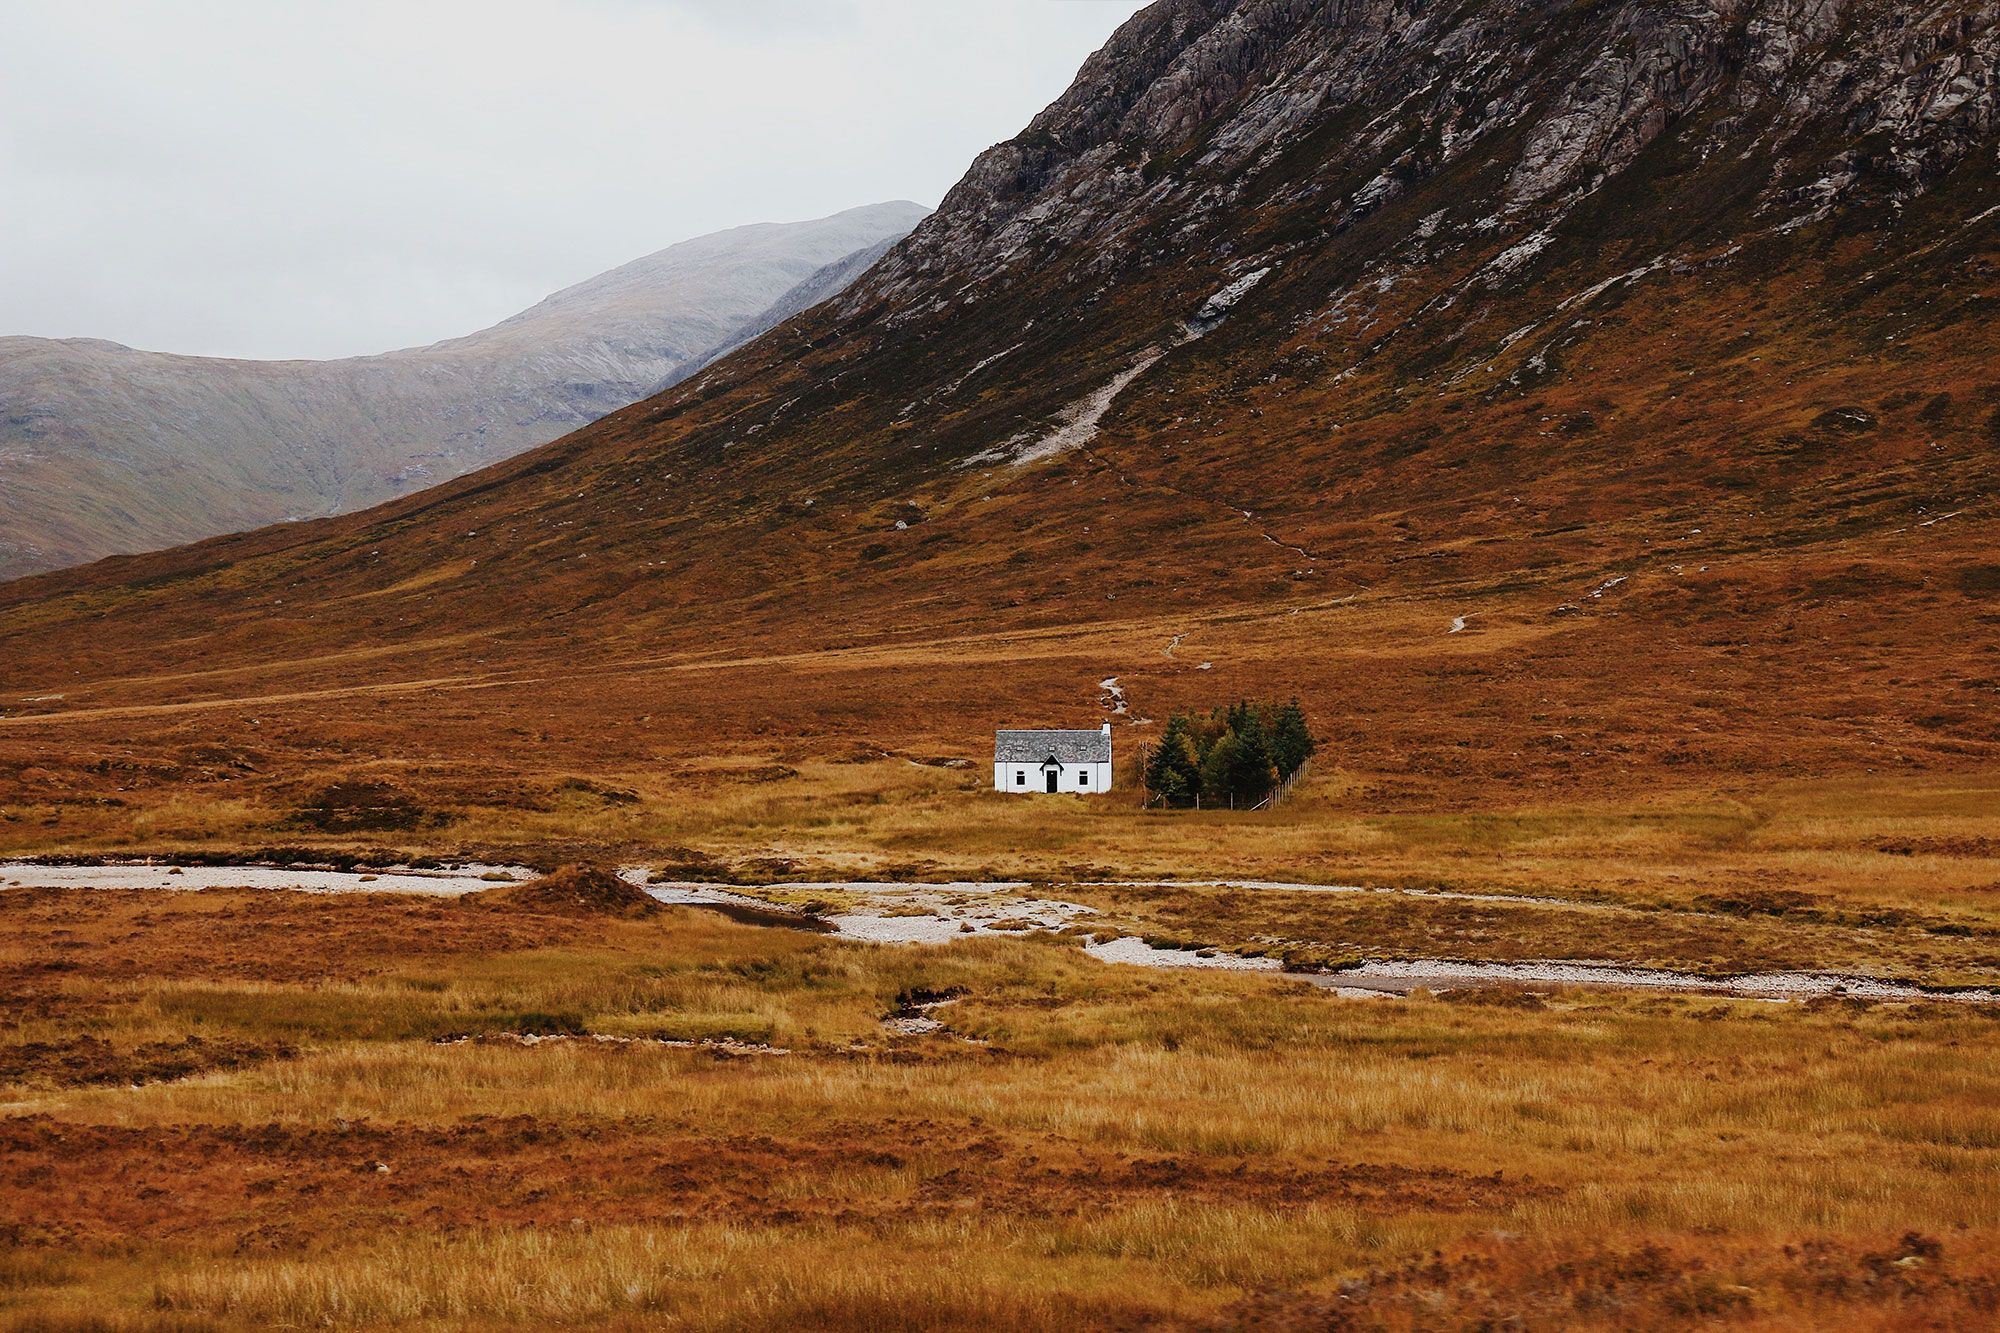 Impressive photograph of a small farm house in the isolated Glencoe valley. It’s Autumn, a small stream flows in front of the farm and a vast mountain can be seen in the background.